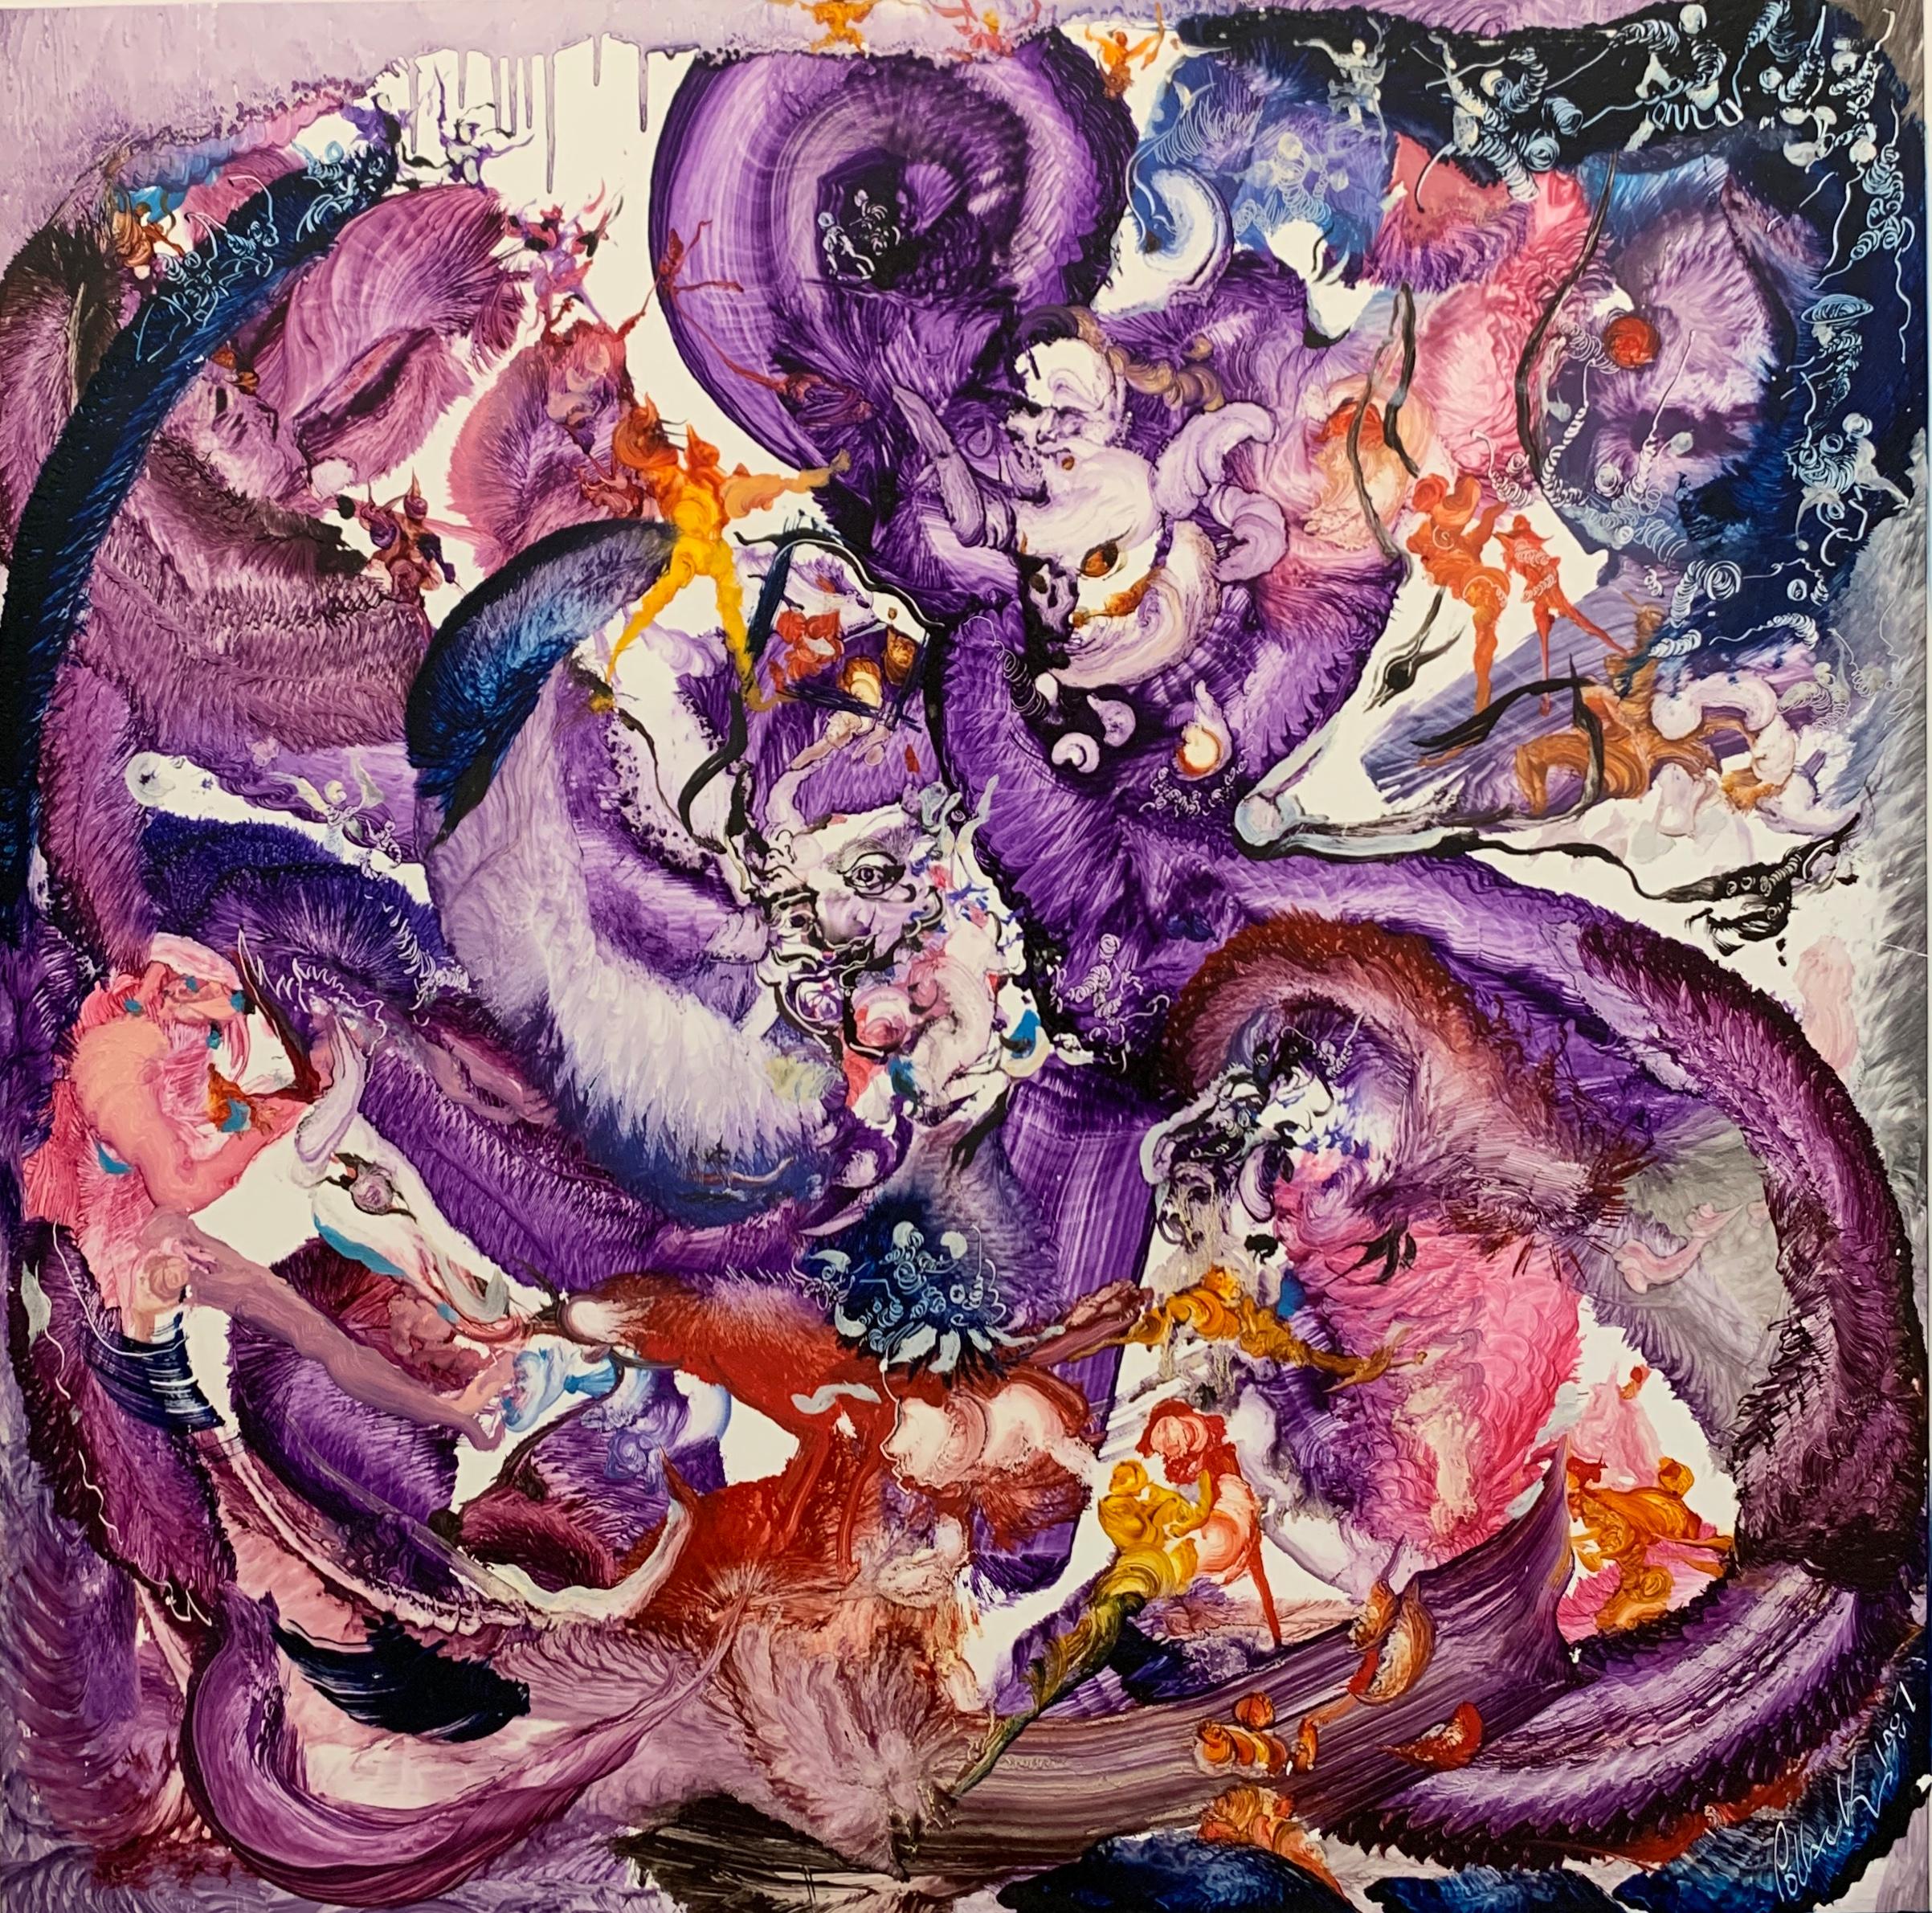 "Year of Emotion" Reginald Pollack Abstract Expressionist Oil on Masonite Purple Palm Springs Abstract Expressionist

Main Colors: Purple

Oil on Masonite painting by late American Artist Reginald Pollack.  It has a 1/4" to 3/8" white masonite